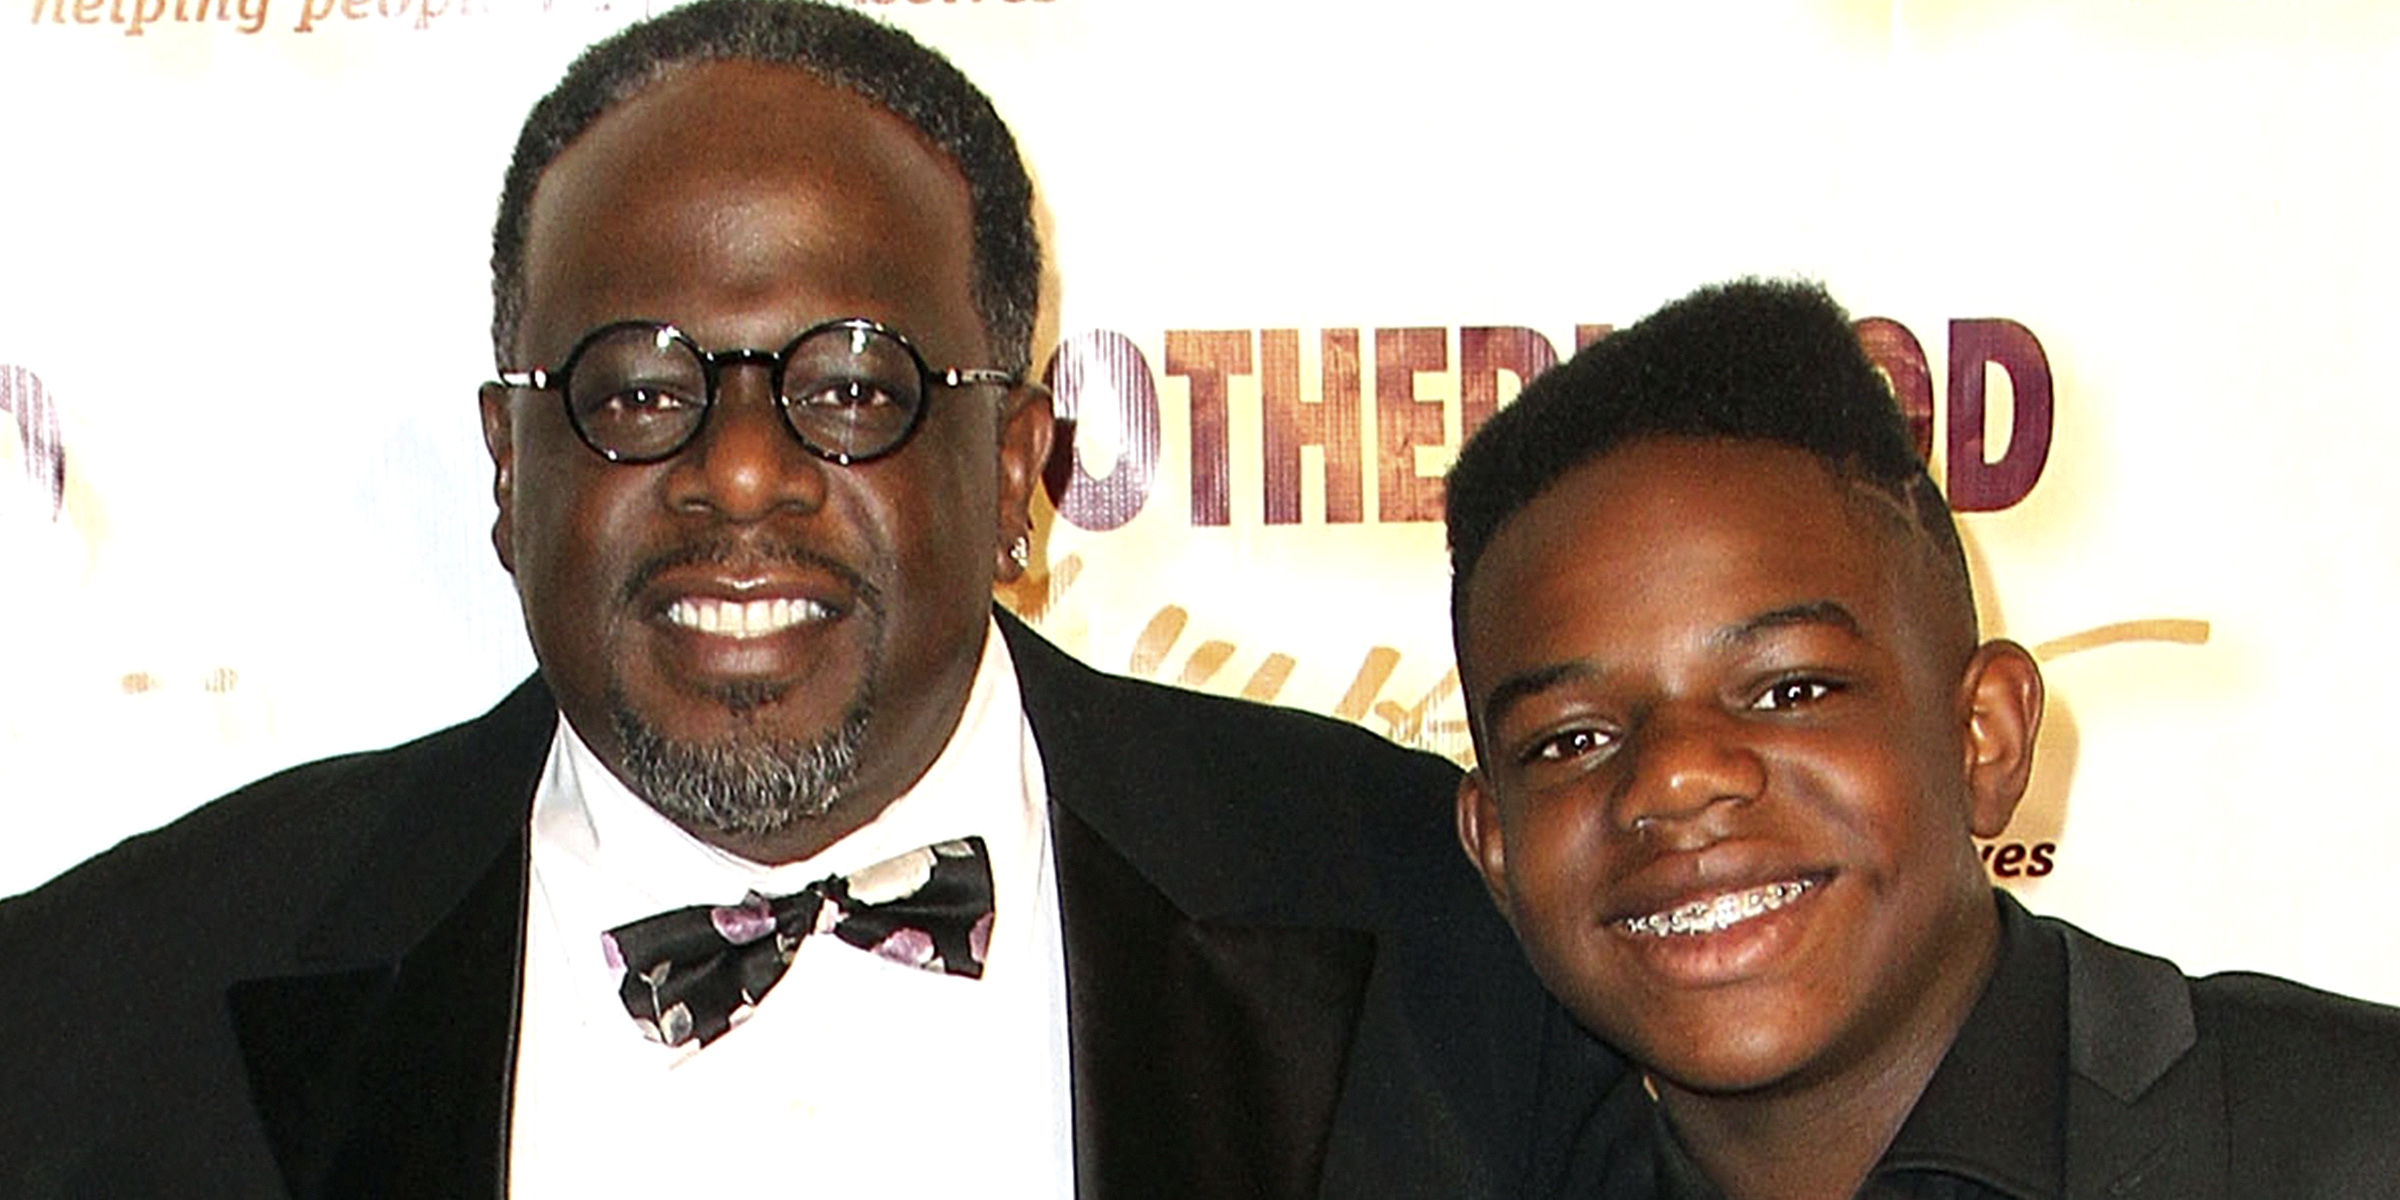 Cedric the Entertainer and Croix Kyles | Source: Getty Images